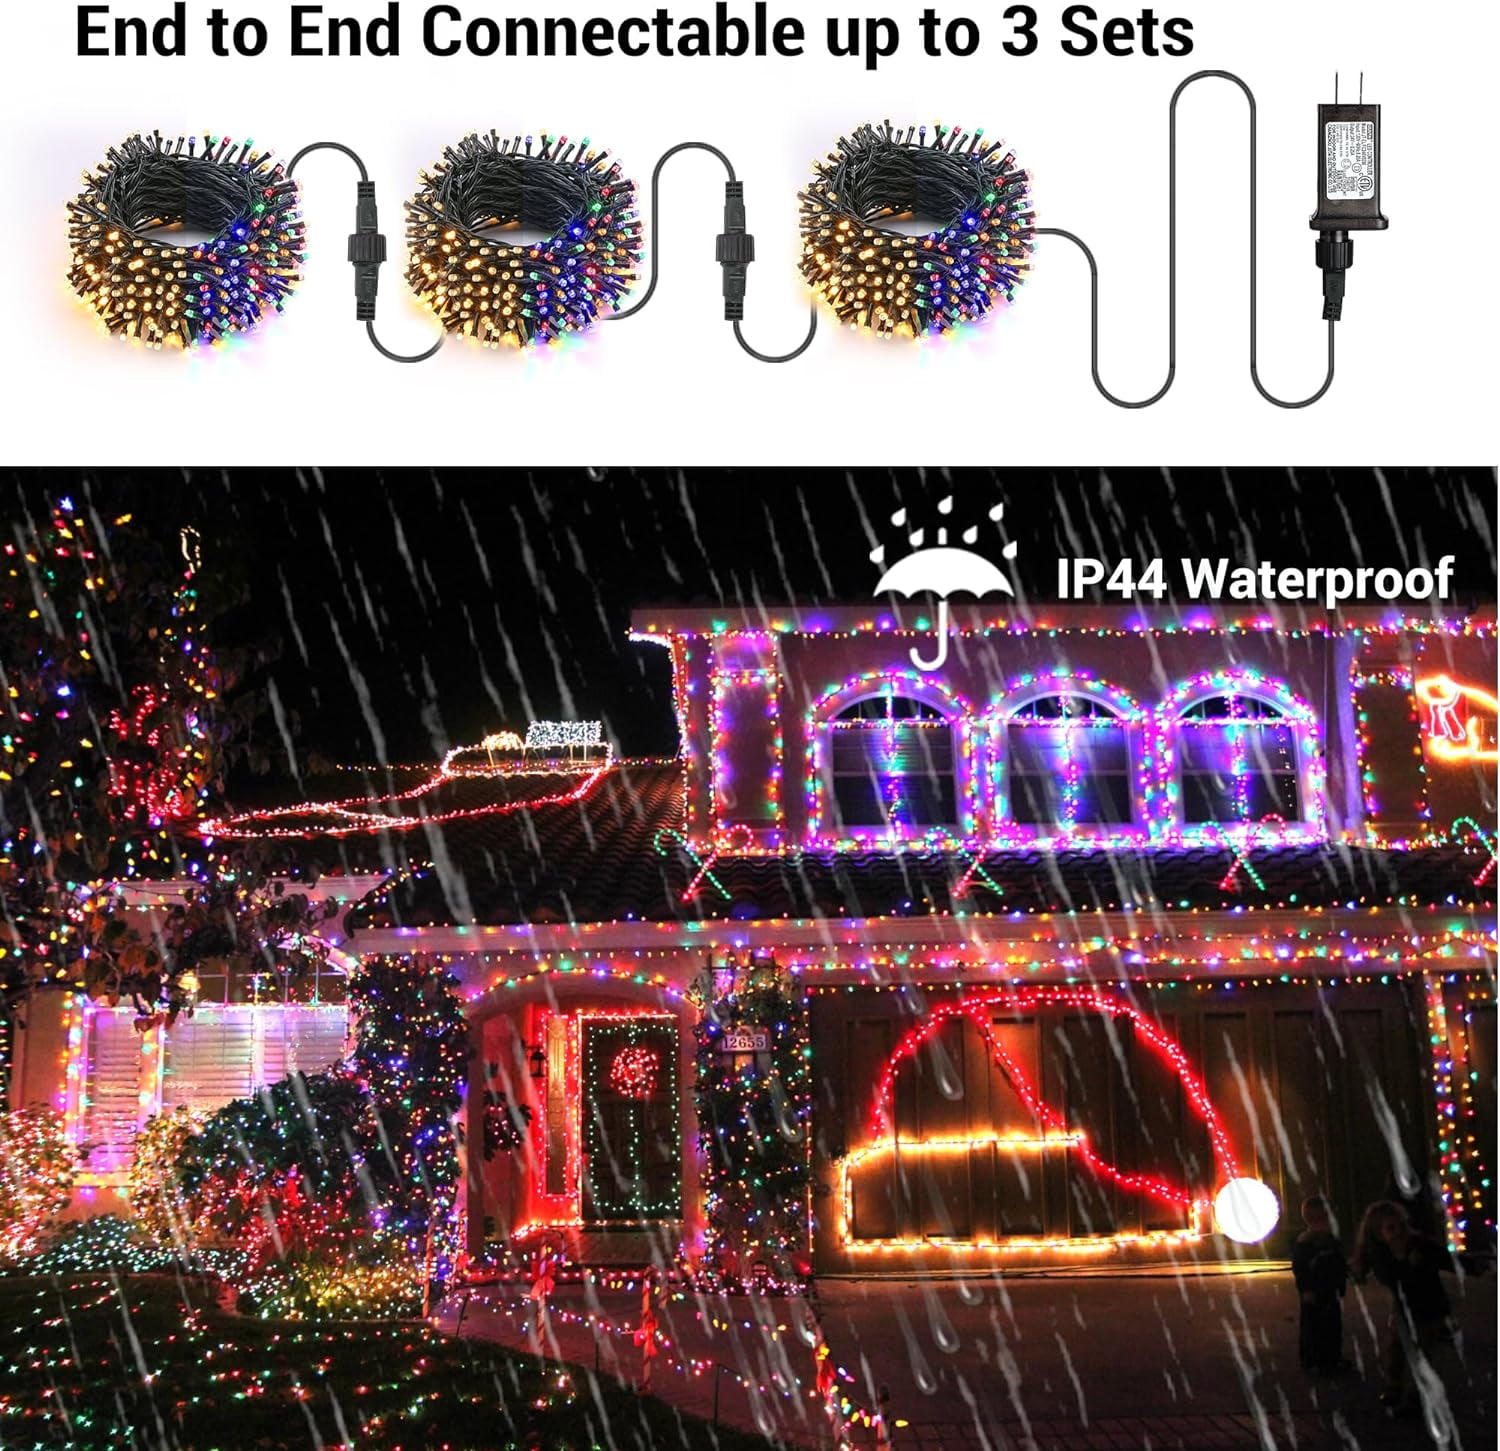 Voolex Christmas Lights Color Changing 16 Modes 200 LED 65 ft, Decorative Christmas Tree Lights with Remote Control - Outdoor Waterproof Warm Color